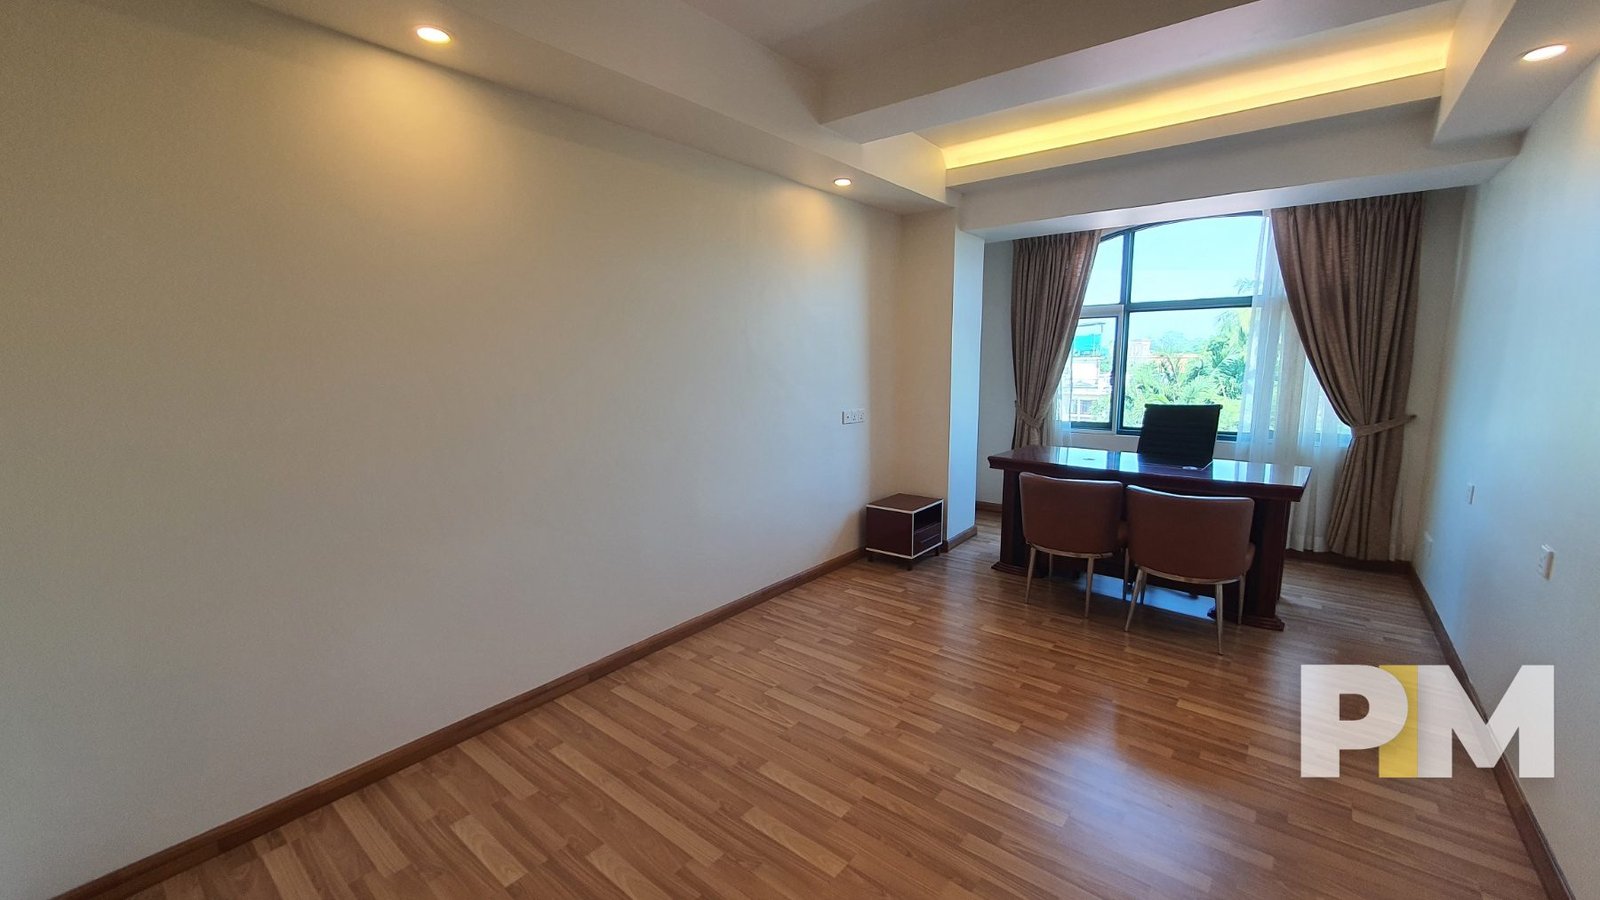 office room - property for rent in yangon